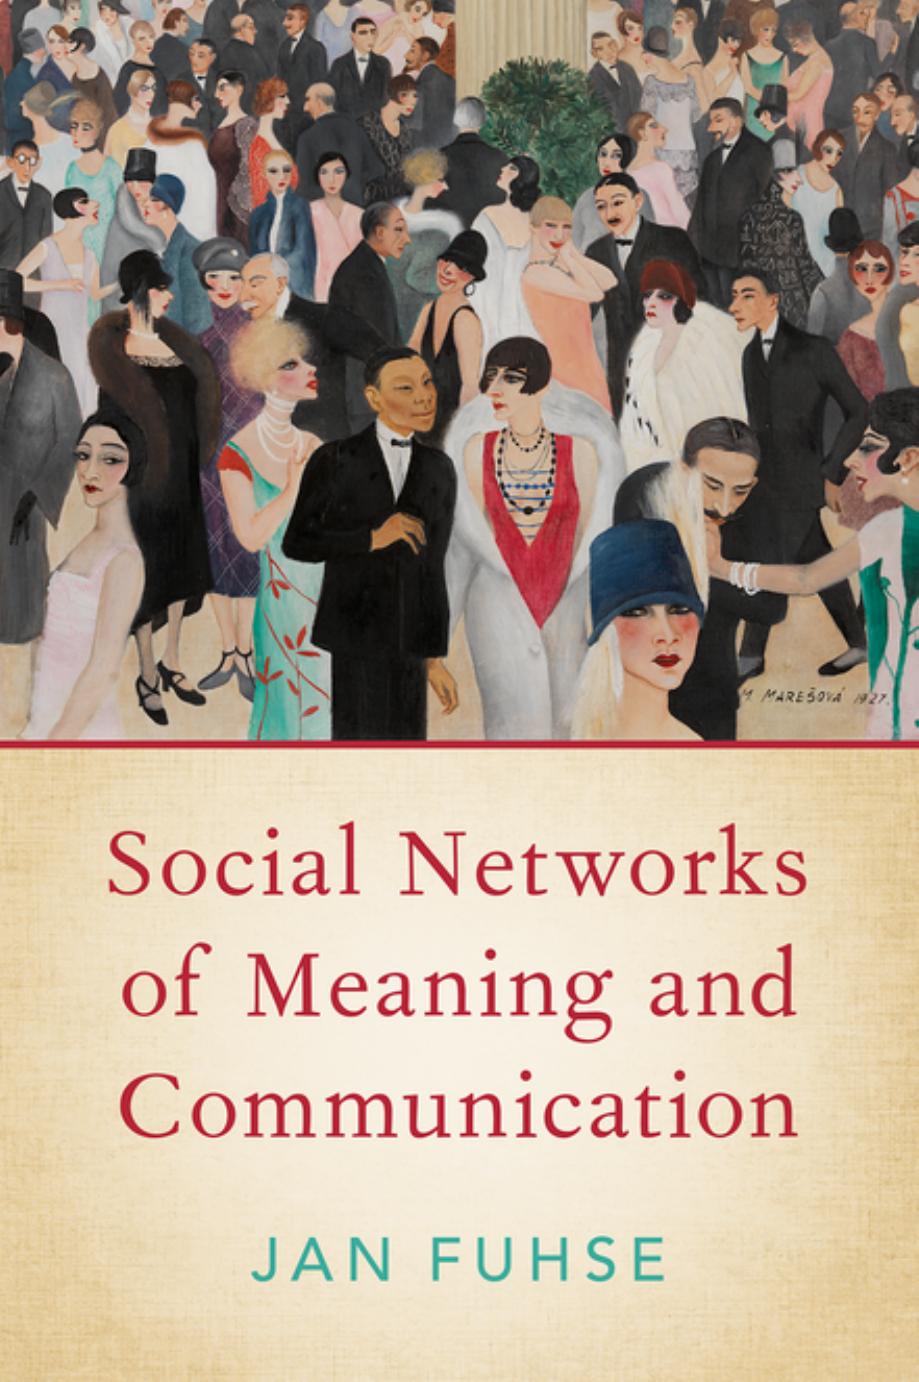 Social Networks of Meaning and Communication by Jan Fuhse;